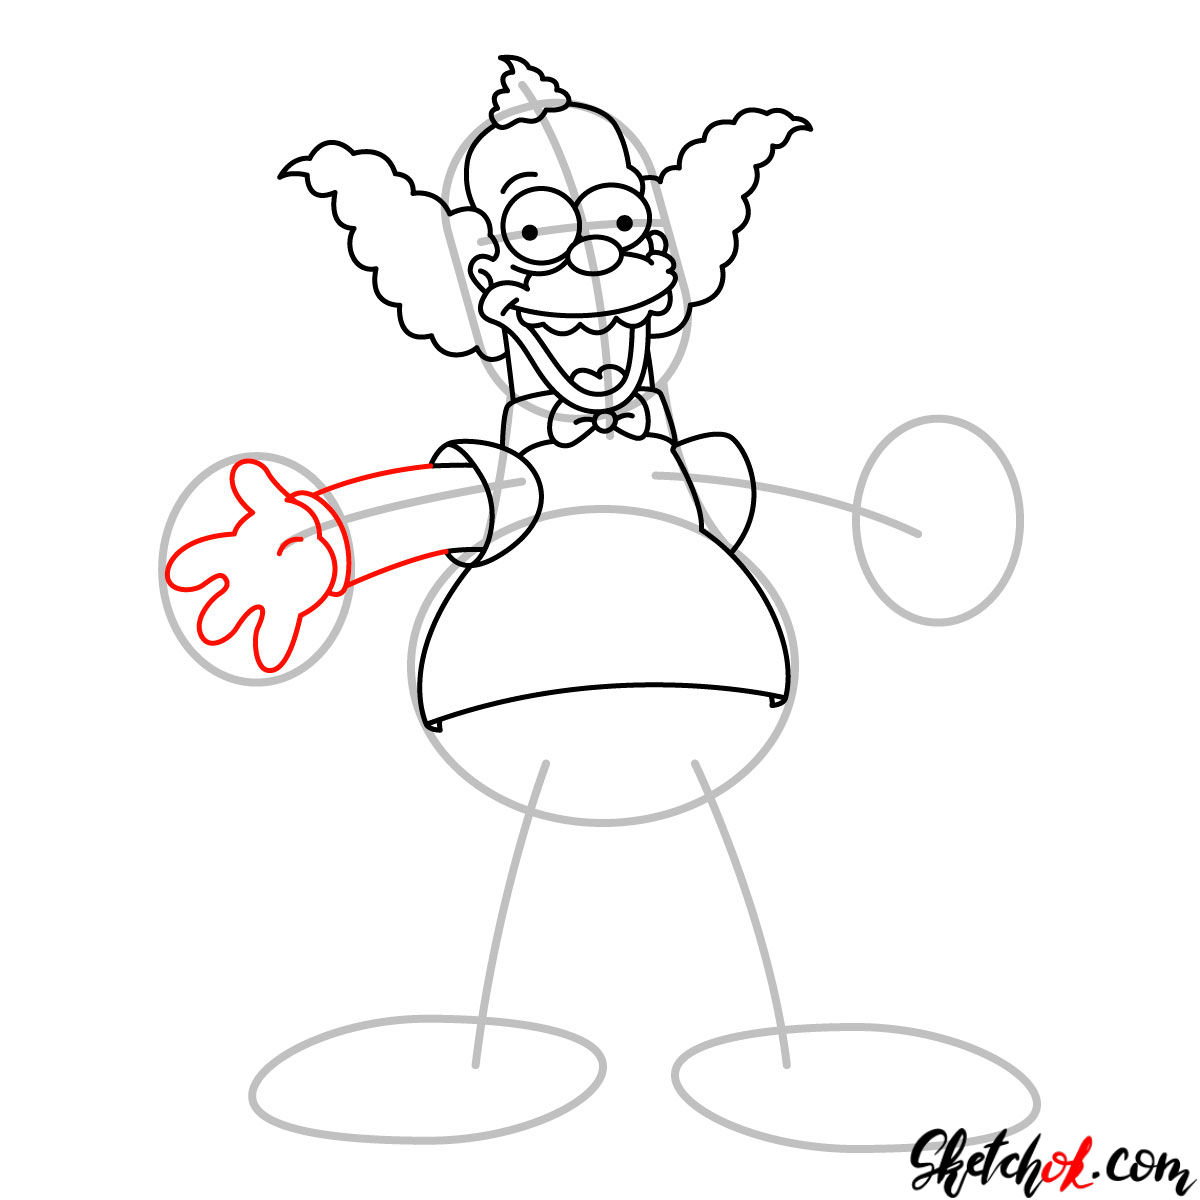 How to draw Krusty the Clown - step 08